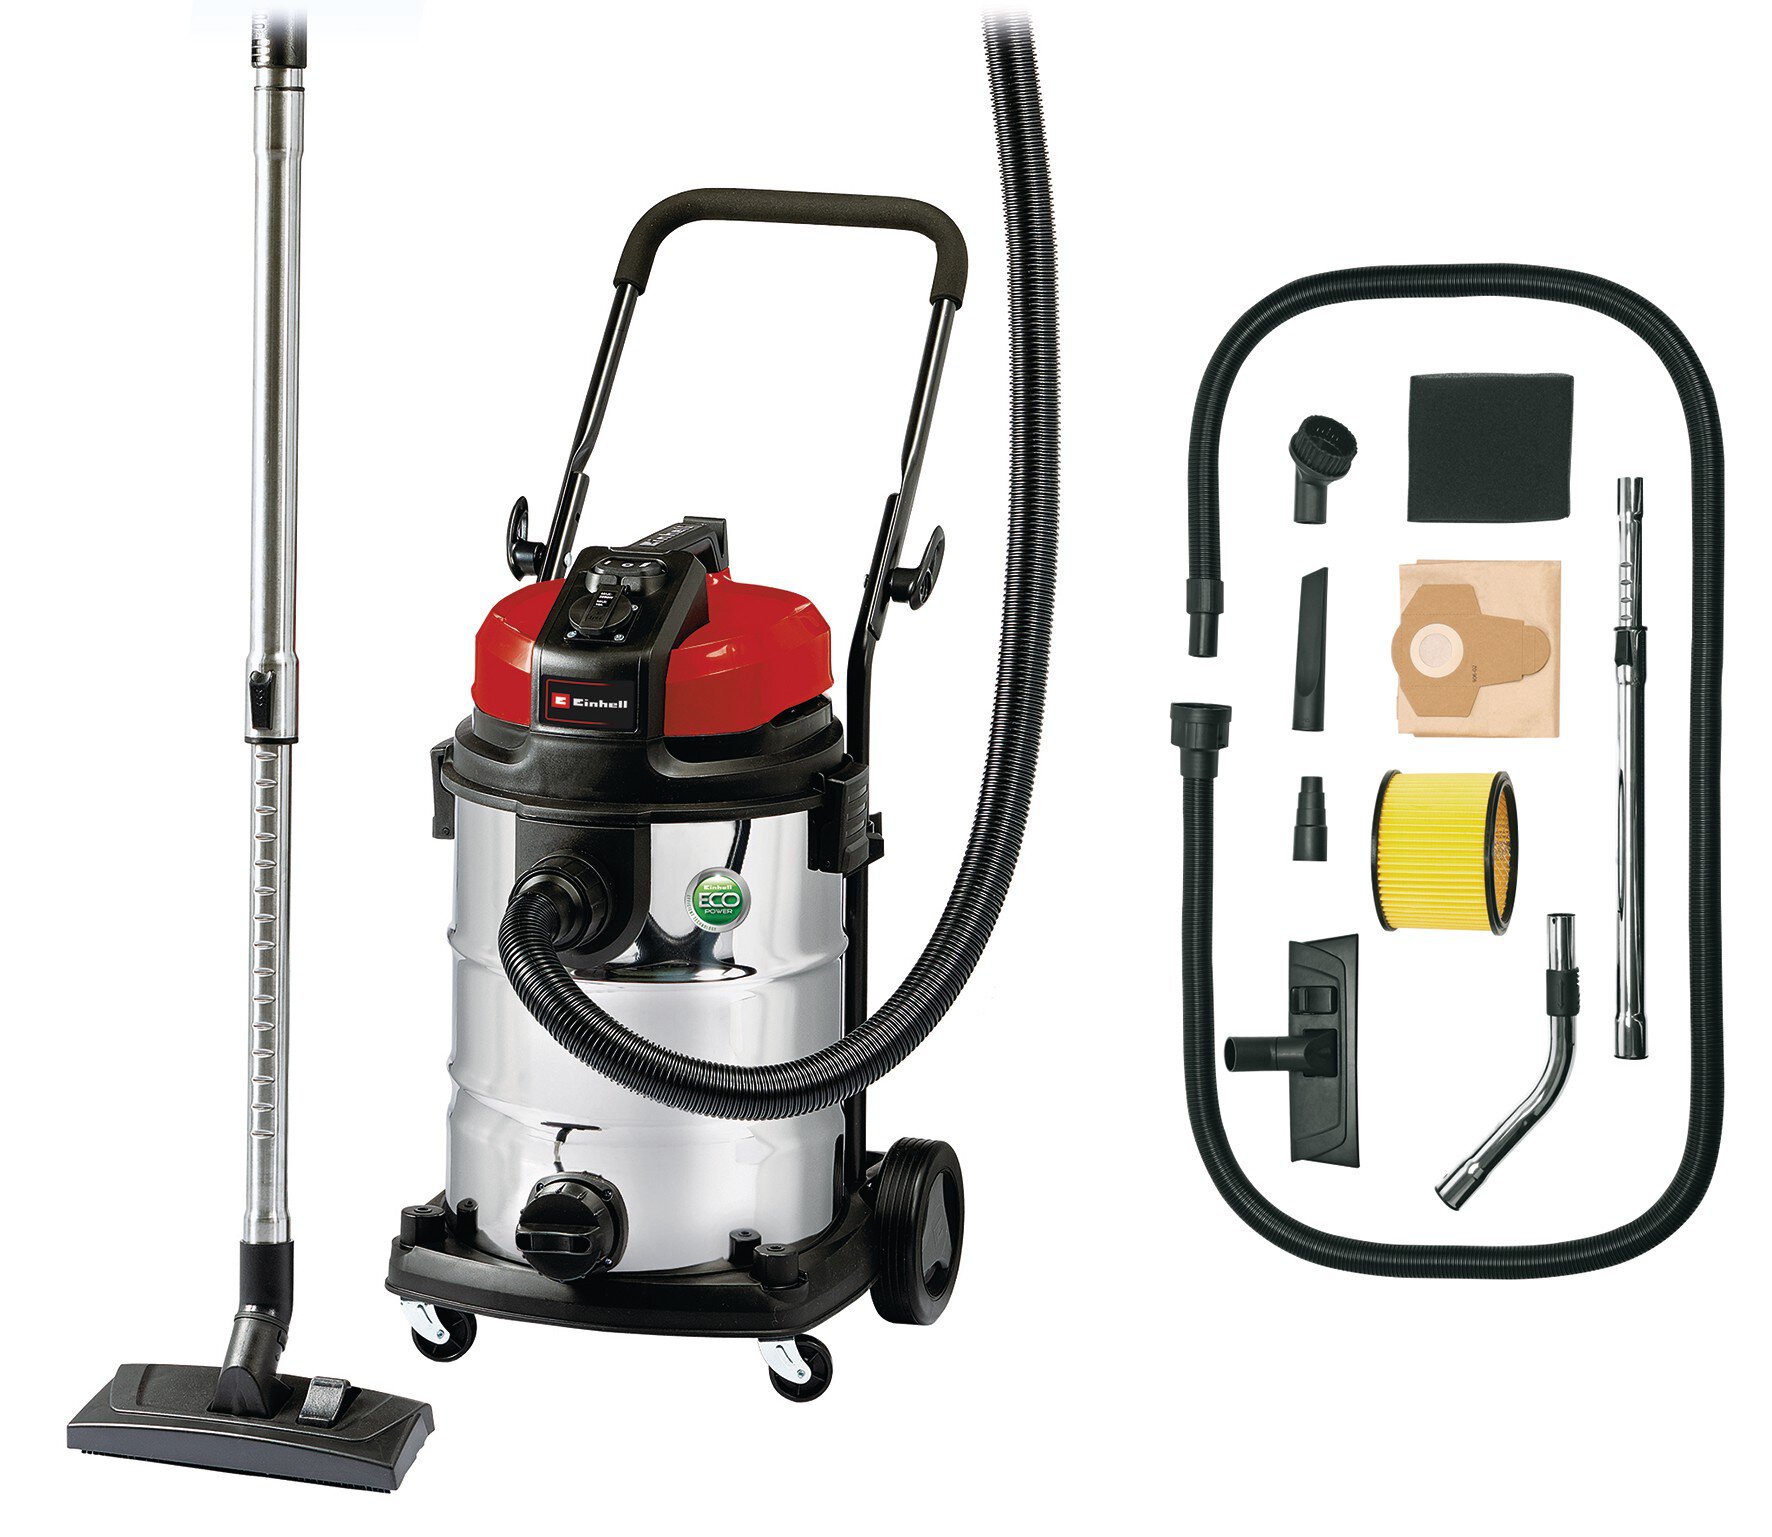 einhell-expert-wet-dry-vacuum-cleaner-elect-2342363-product_contents-101